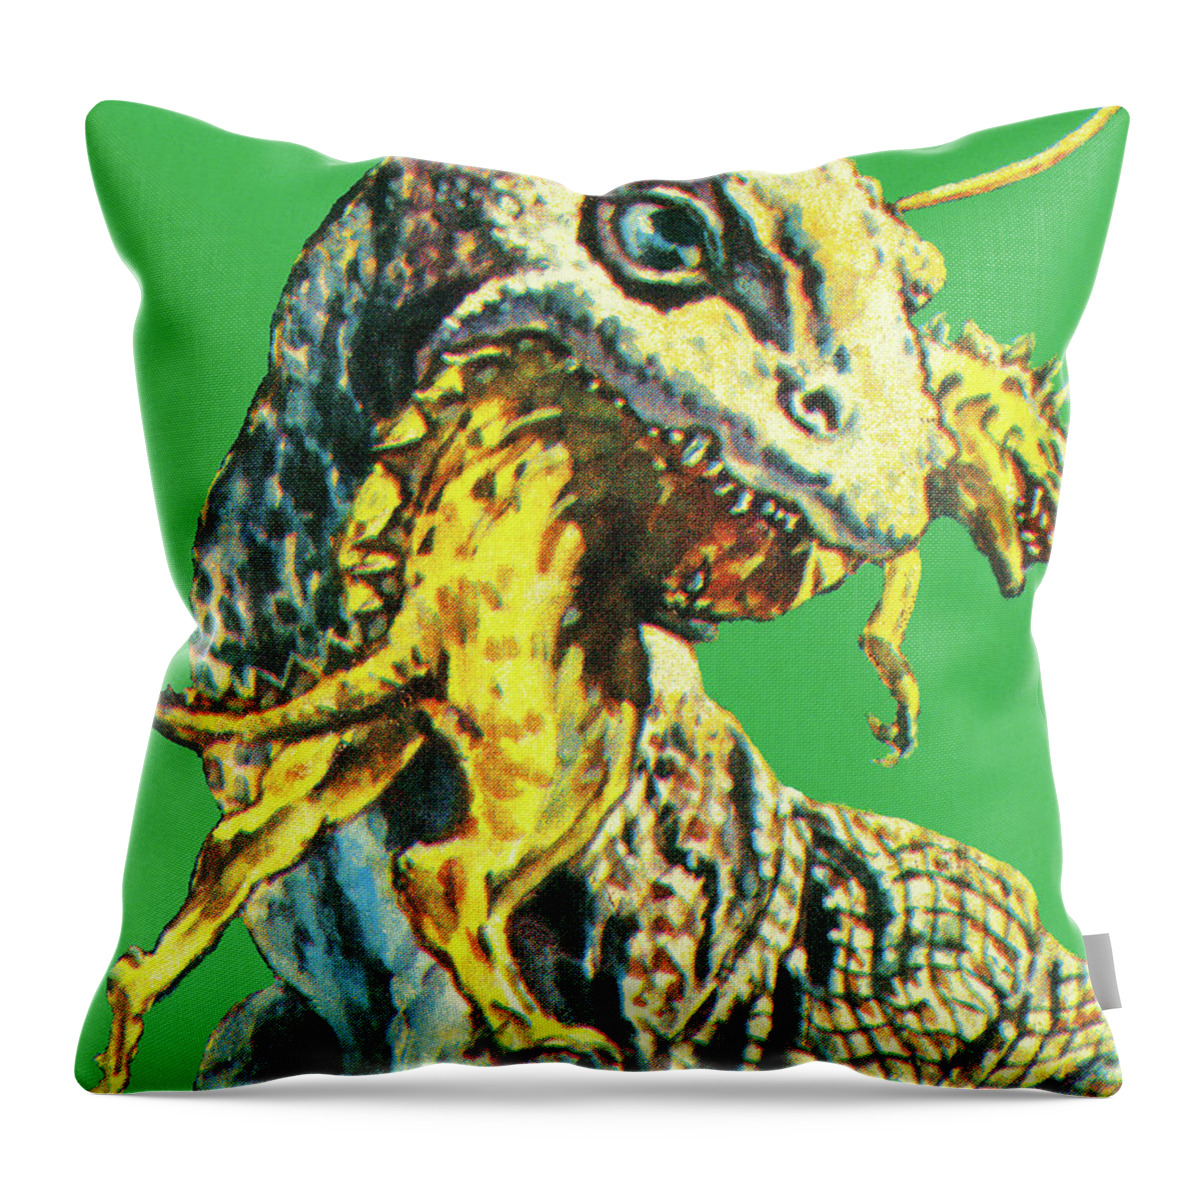 Animal Throw Pillow featuring the drawing Large Dinosaur Eating a Small Dinosaur by CSA Images